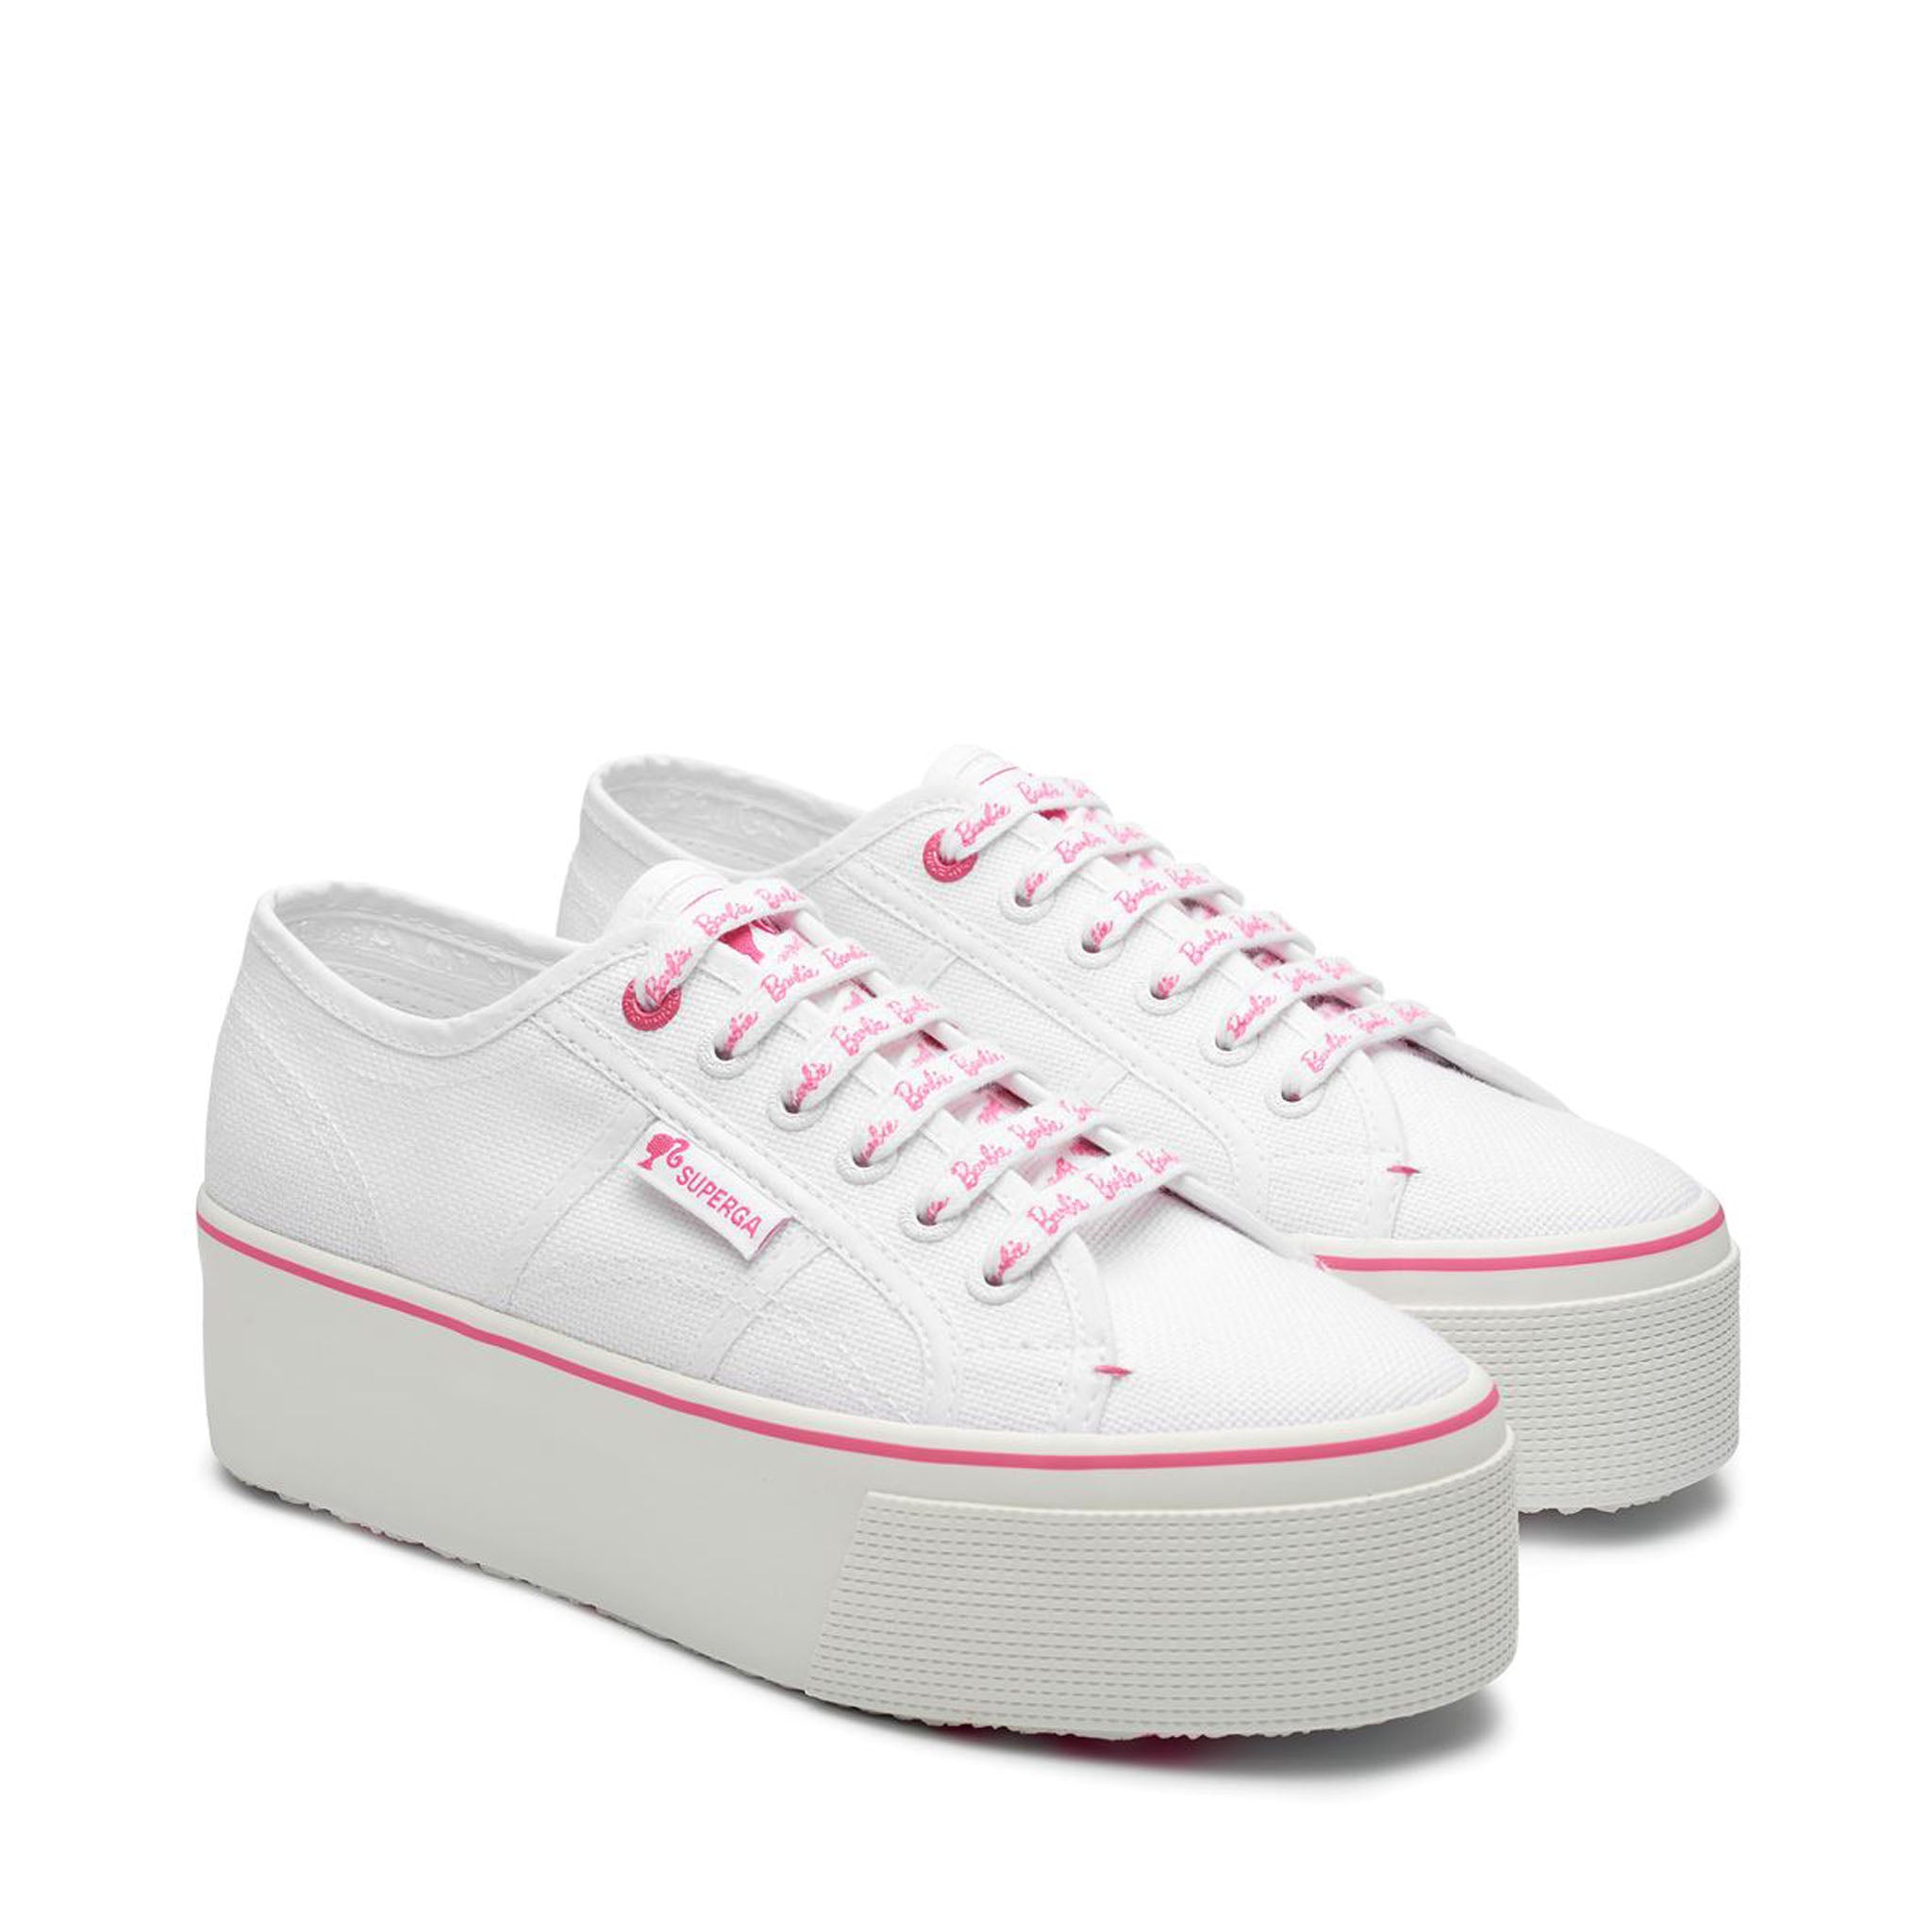 Superga 2790 Barbie Classic Sneakers. Front view.